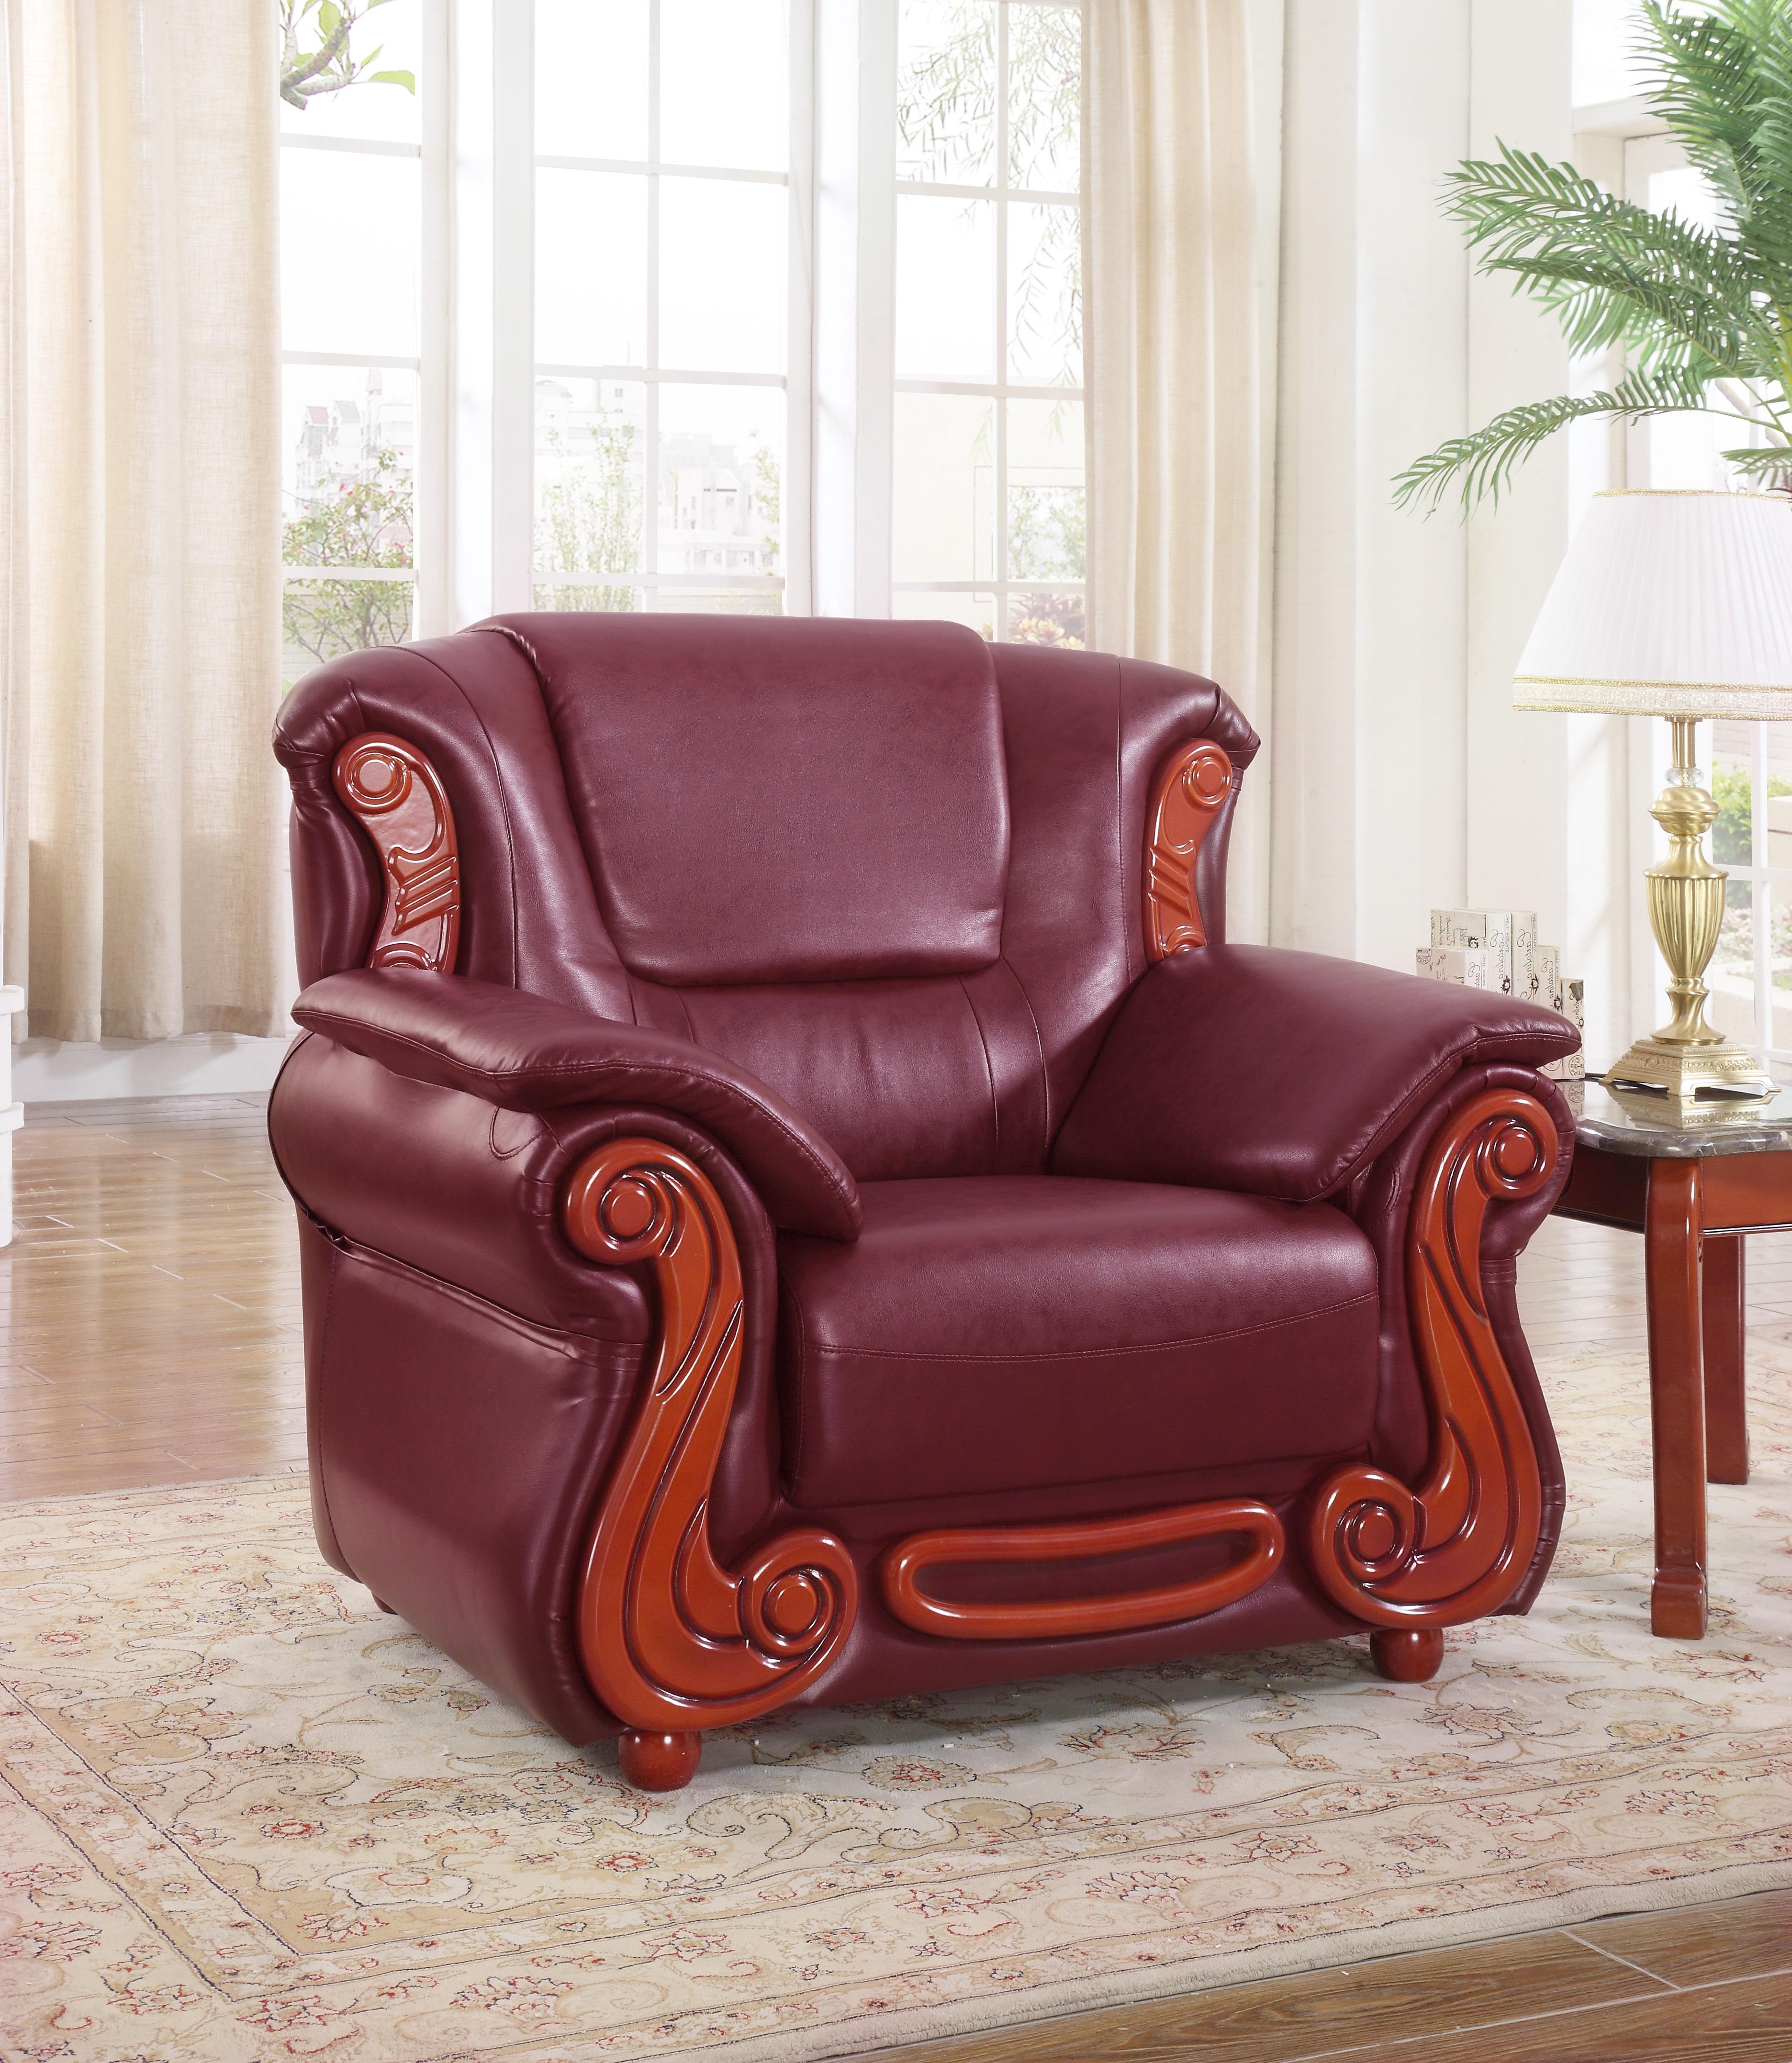 

                    
Meridian Furniture 632 Bella Burgundy Sofa Loveseat and Chair Set Burgundy Bonded Leather Purchase 
